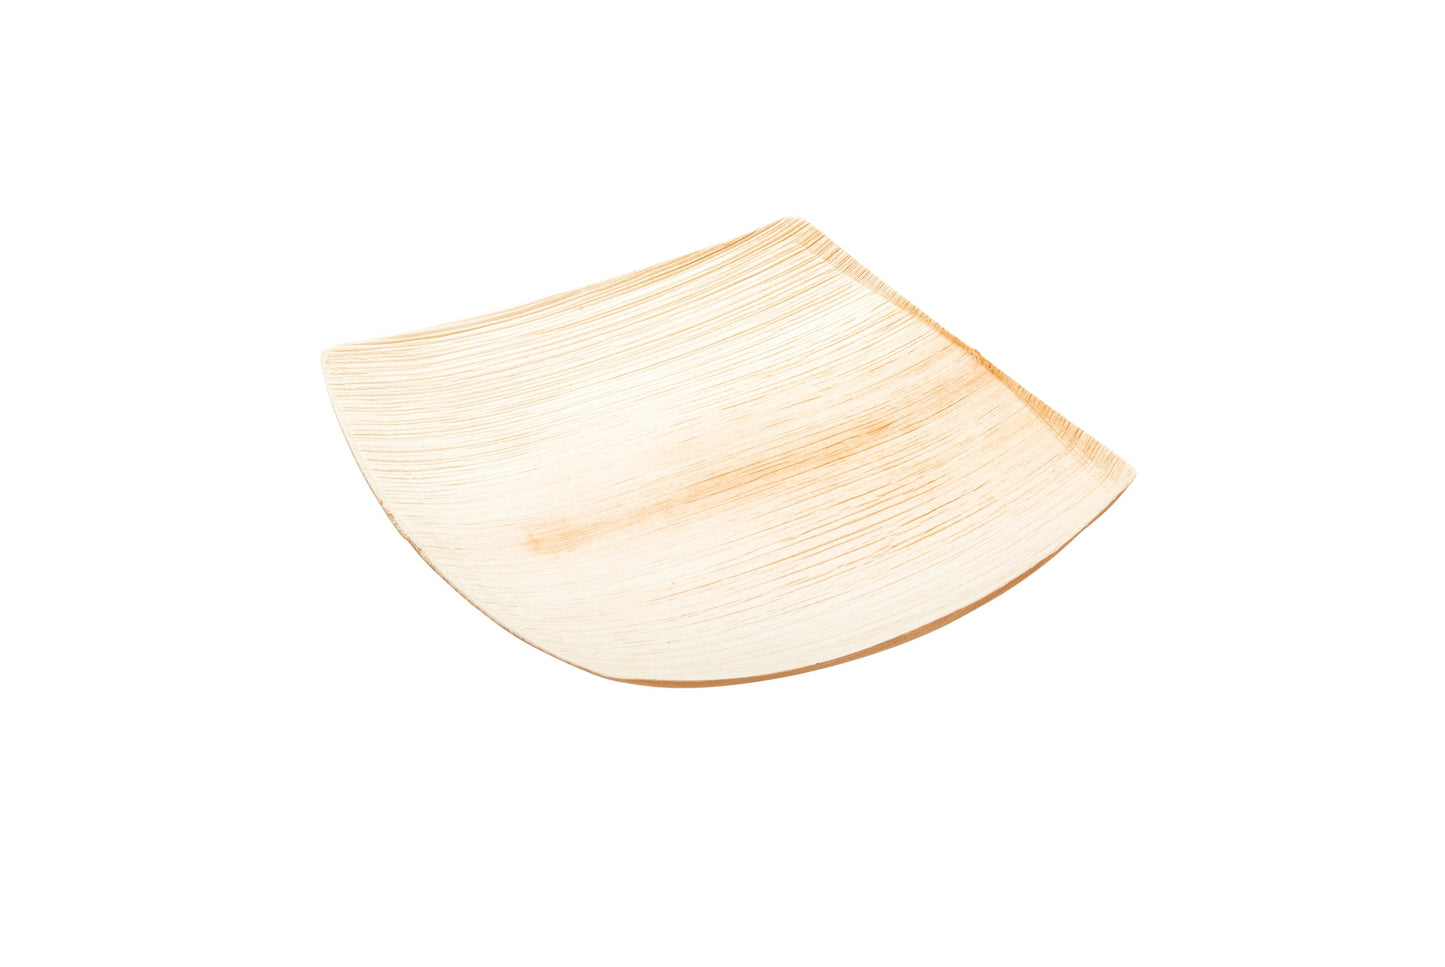 Midori Palm Leaf Large Square Plate 8 inches 100 count box